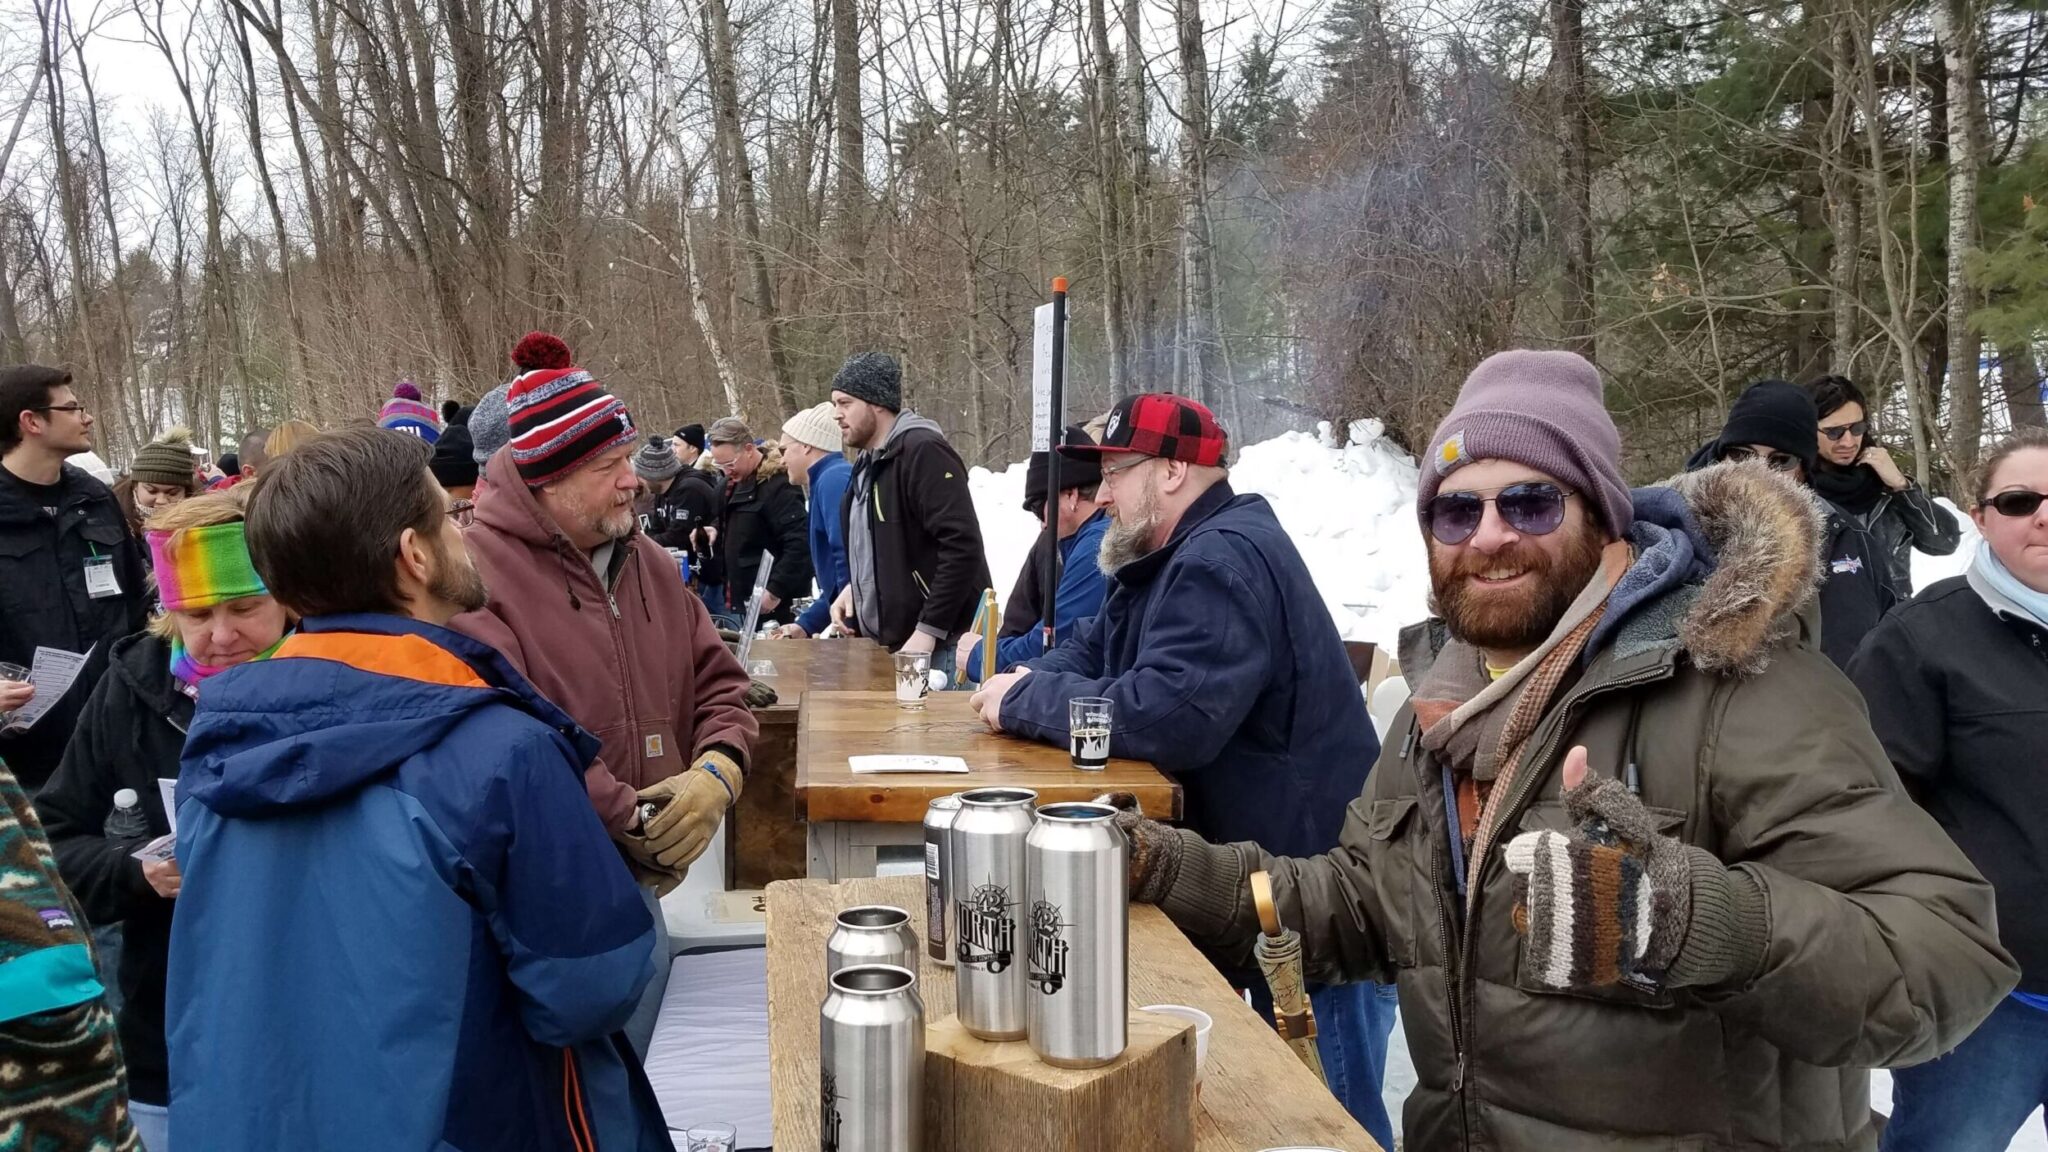 Excitement is brewing for Barrel Fest 2022 in Lake Adirondack